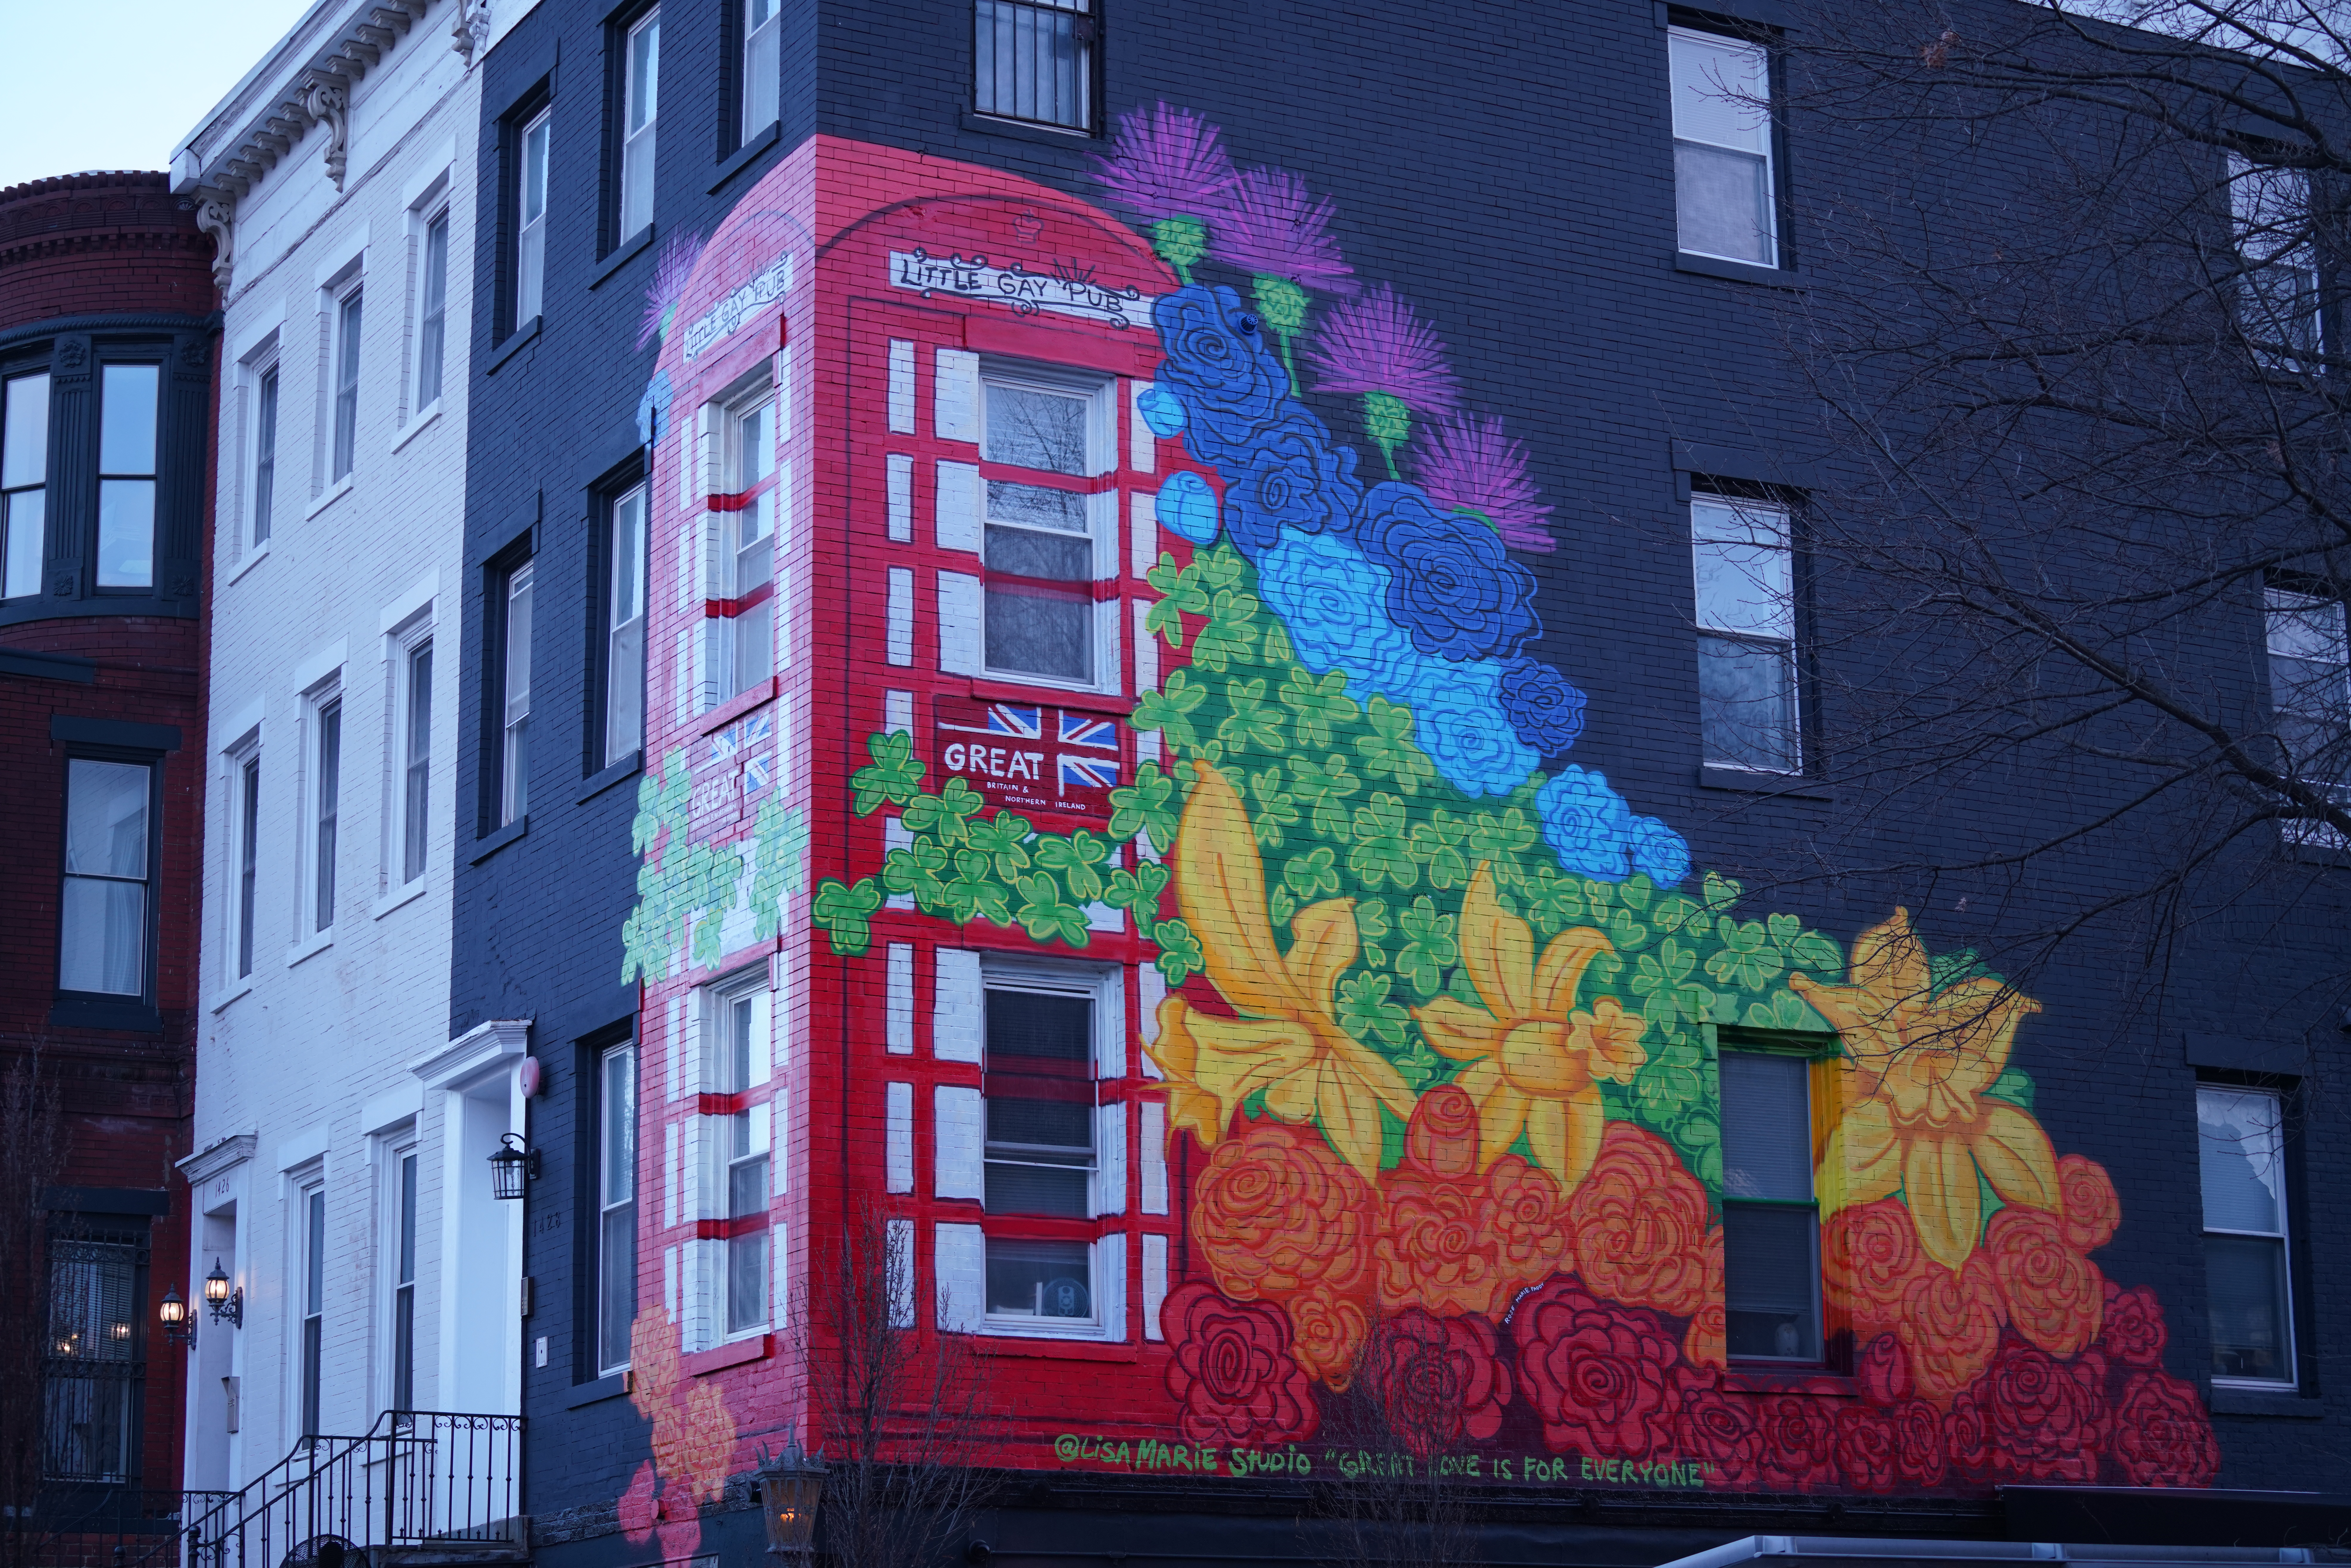 Great Love Mural painted by Lisa Marie Thalhammer on the outside walls of the Little Gay Pub in Washington DC.